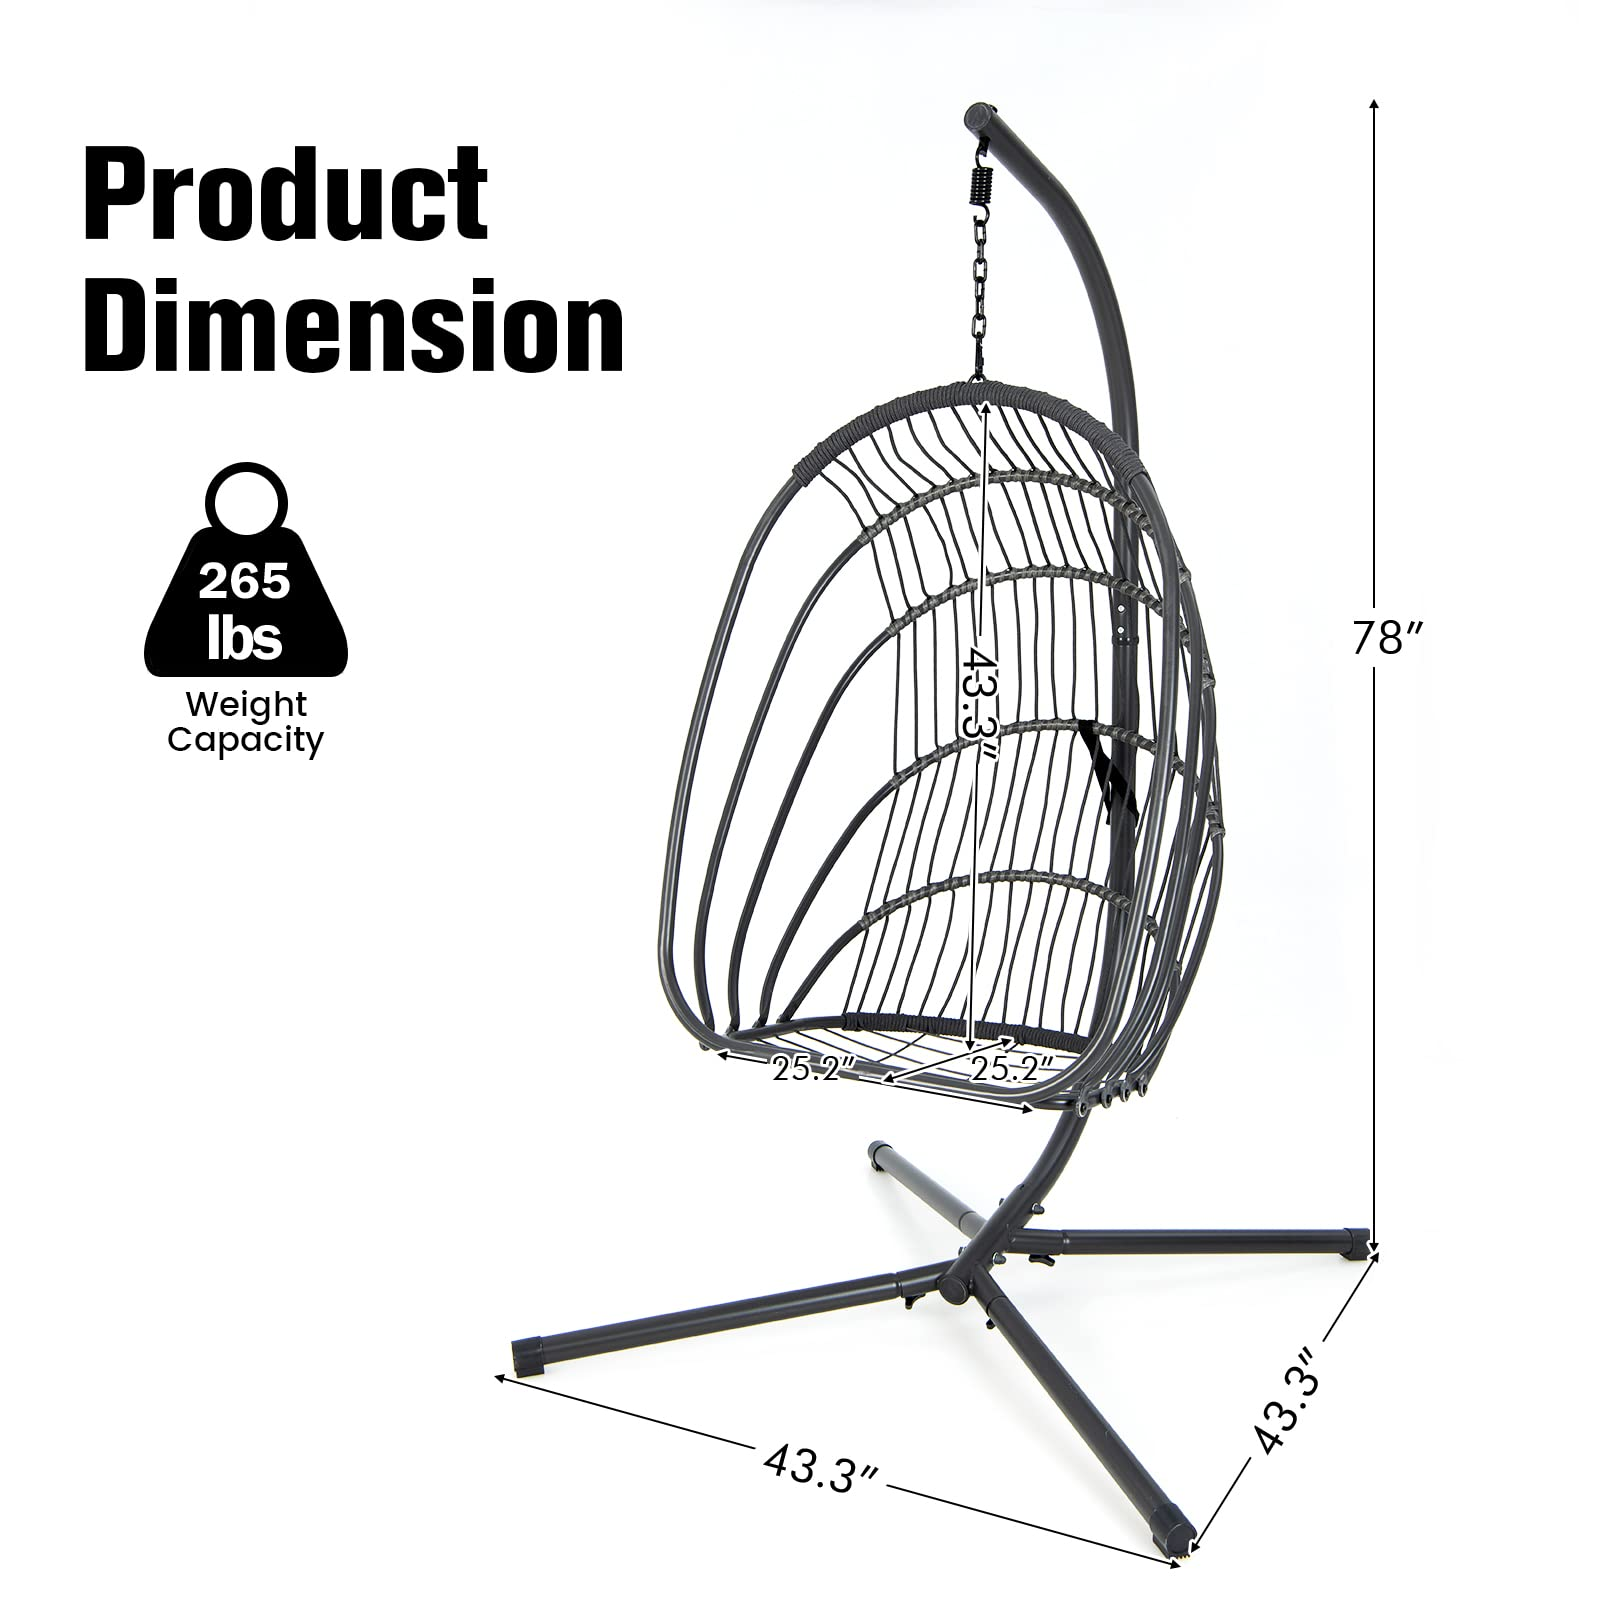 Giantex Egg Chair Hammock Stand - Hanging Swing with Stand